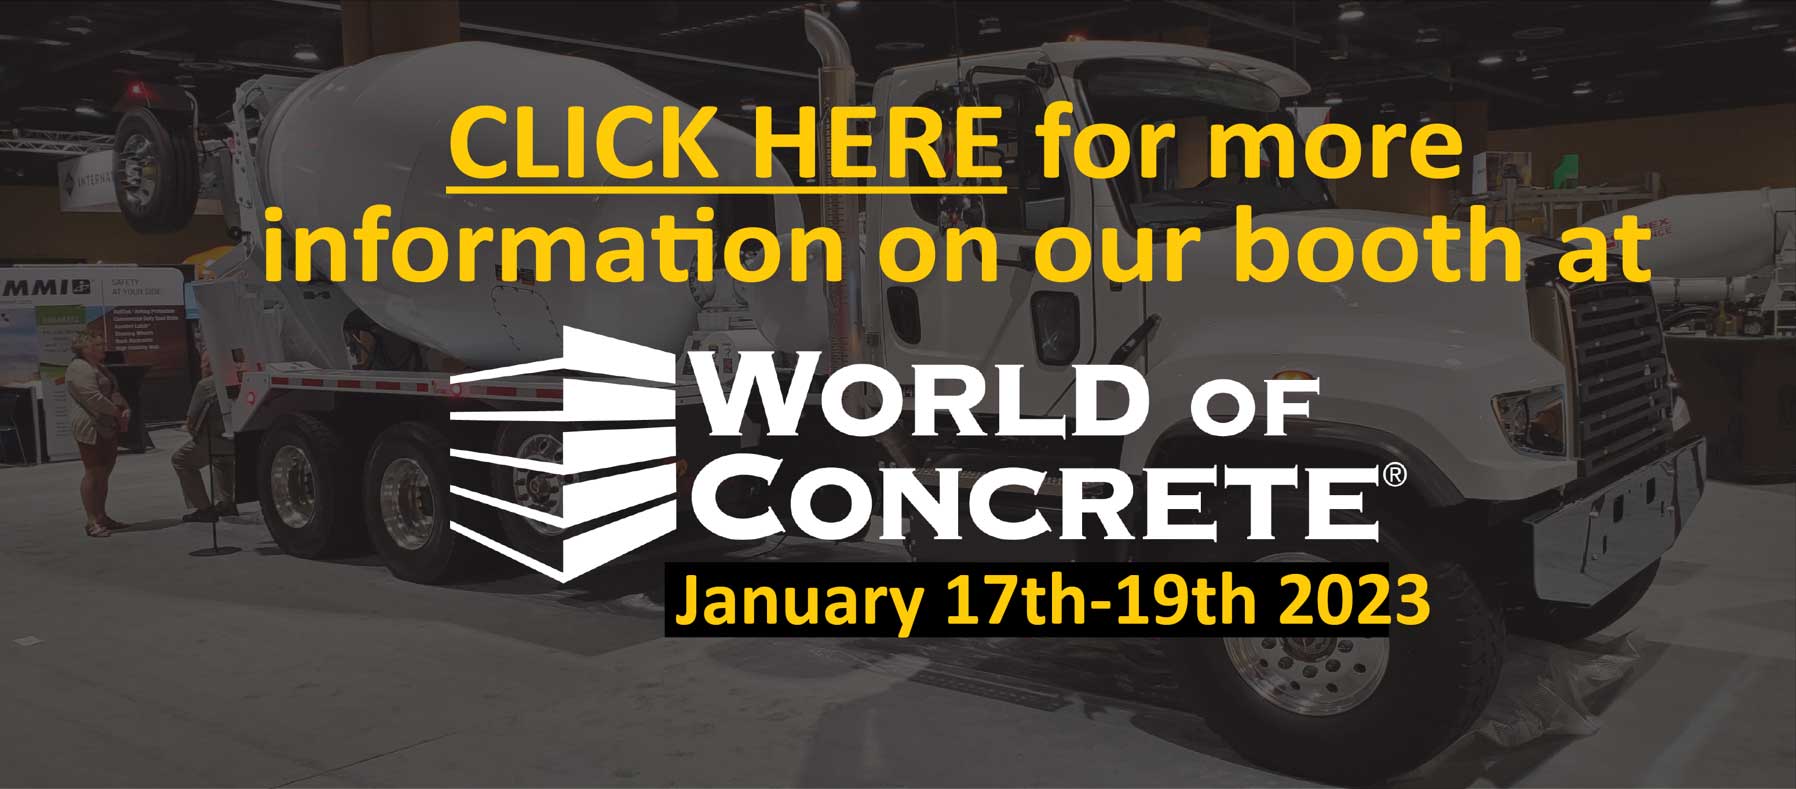 CLICK HERE for more information on our booth at World of Concrete January 17-19th 2023